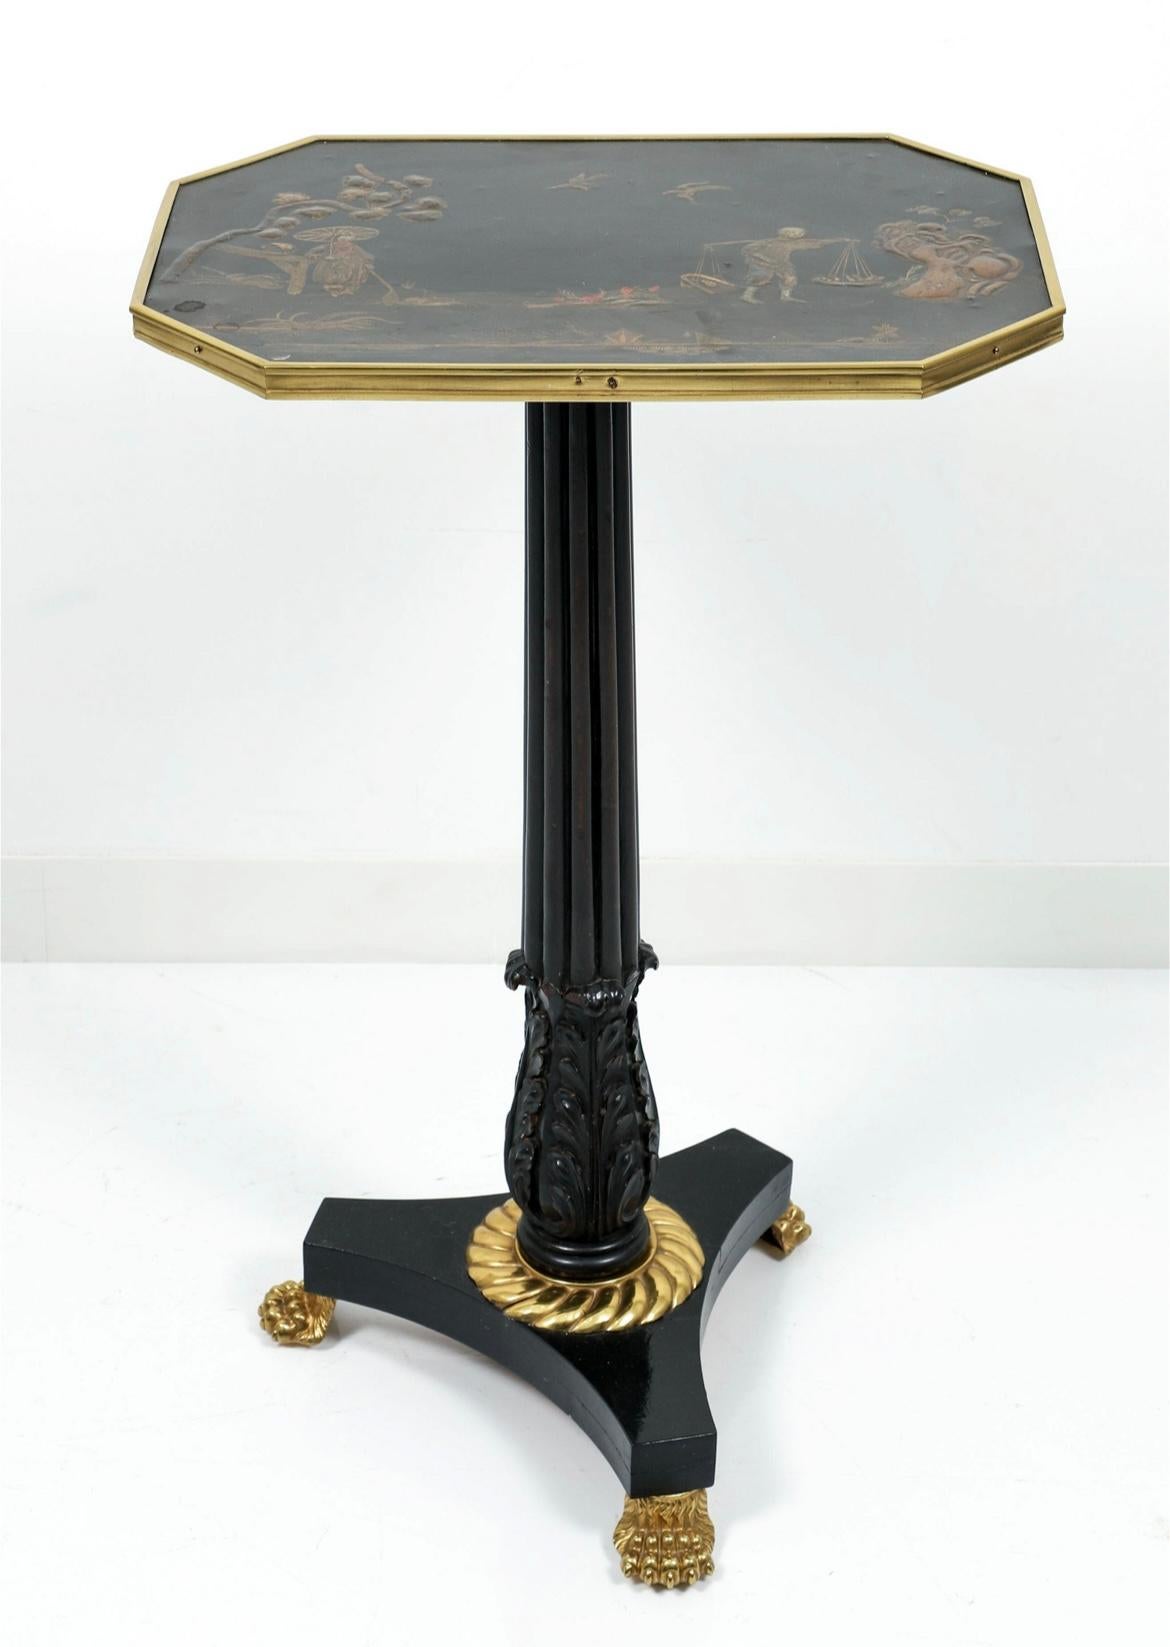 English Regency Chinoiserie Lacquer Top Ebonized Brass Mounted Stand, circa 1820 For Sale 4